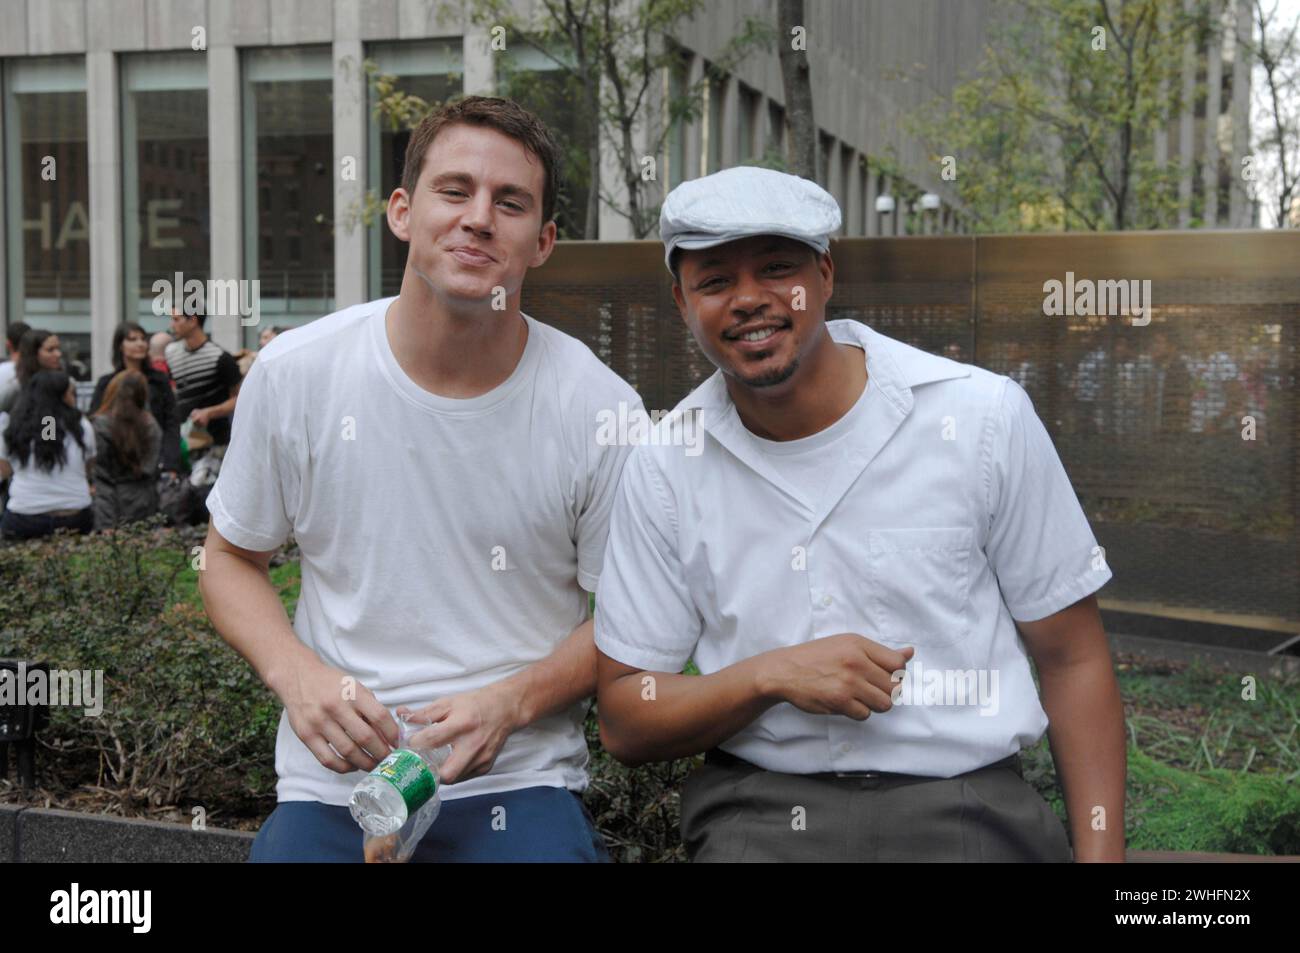 Manhattan, United States Of America. 25th Sep, 2007. SMG Howard Tatum 092607 05 EXCLUSIVE COVERAGE NEW YORK - SEPTEMBER 26, 2007: Actor Channing Tatum and Terrence Howard on the set of their new movie 'Fighting', on September 26, 2007 in New York City. People; Channing Tatum and Terrence Howard Credit: Storms Media Group/Alamy Live News Stock Photo